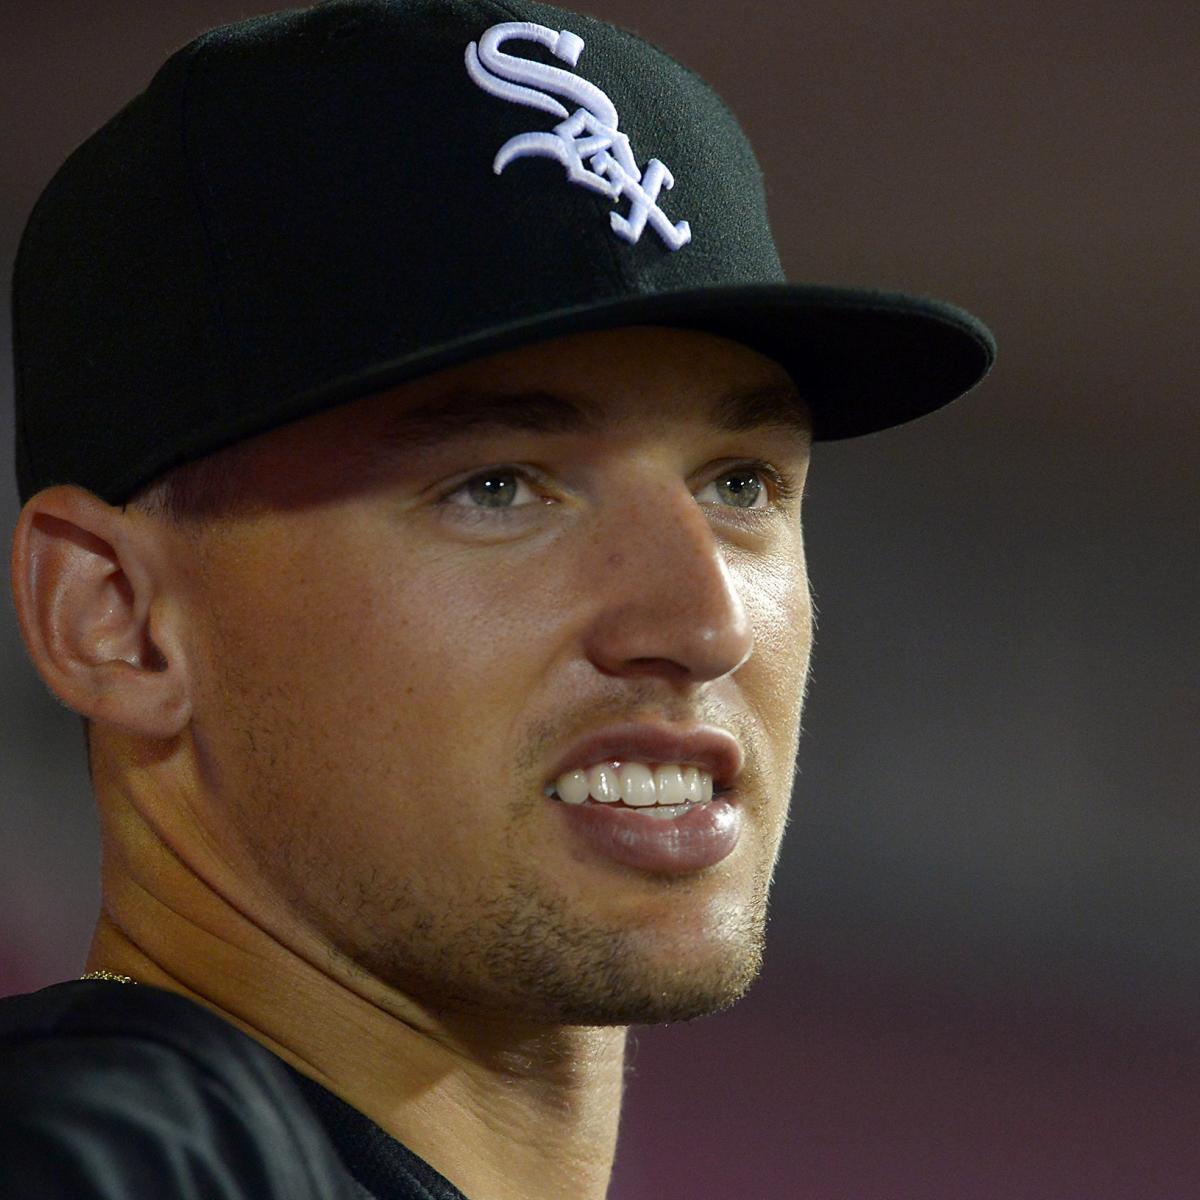 Outfielder Trayce Thompson, brother of NBA star Klay, acquired by